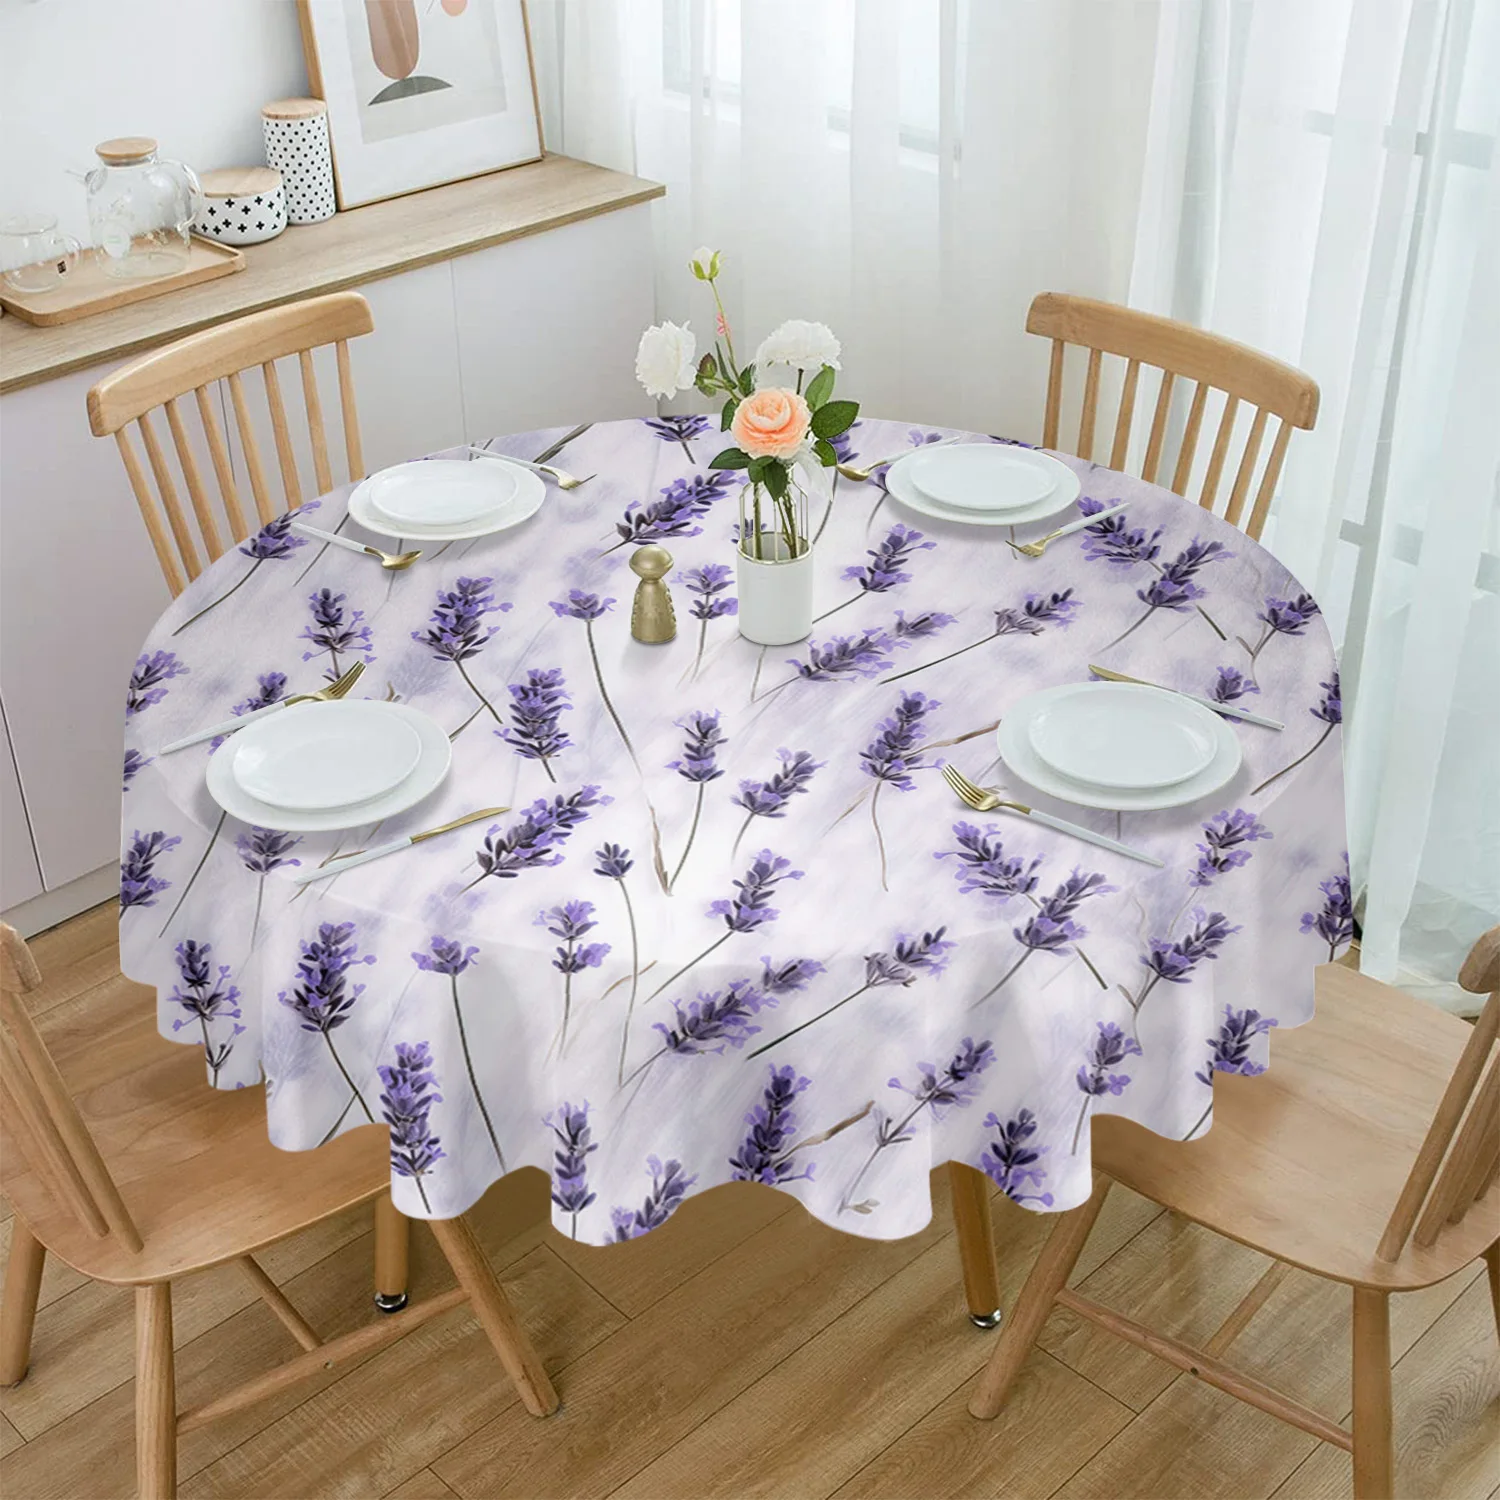 

Lavender Flowers Watercolor Tablecloths for Dining Table Waterproof Round Table Cover for Kitchen Living Room